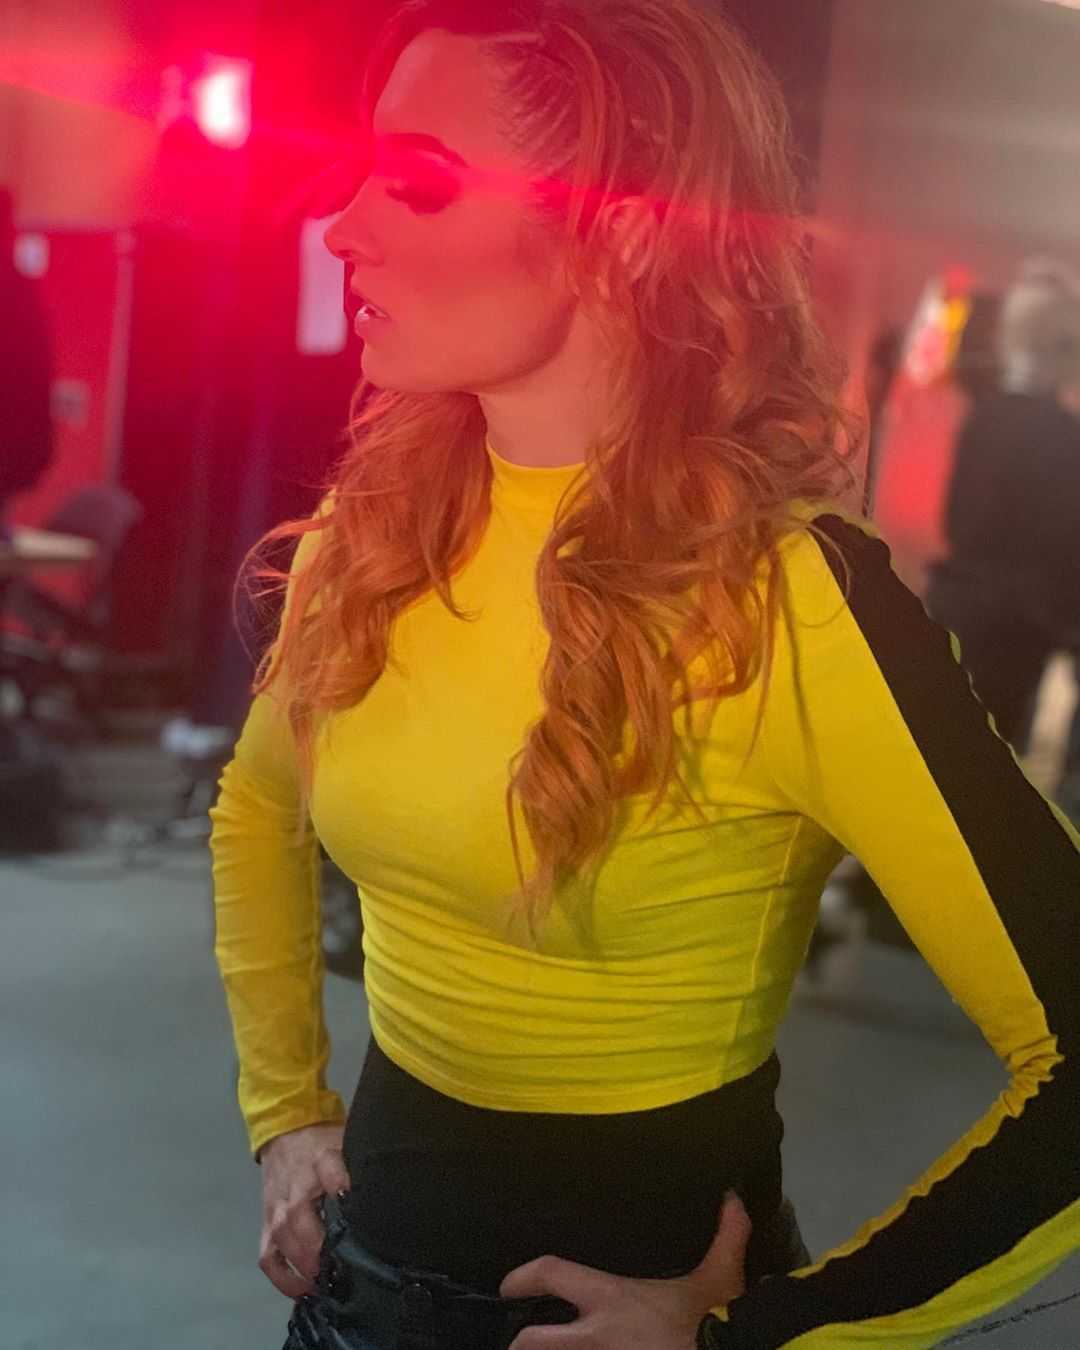 70+ Hot And Sexy Pictures of Becky Lynch – WWE Diva Will Sizzle You Up 5